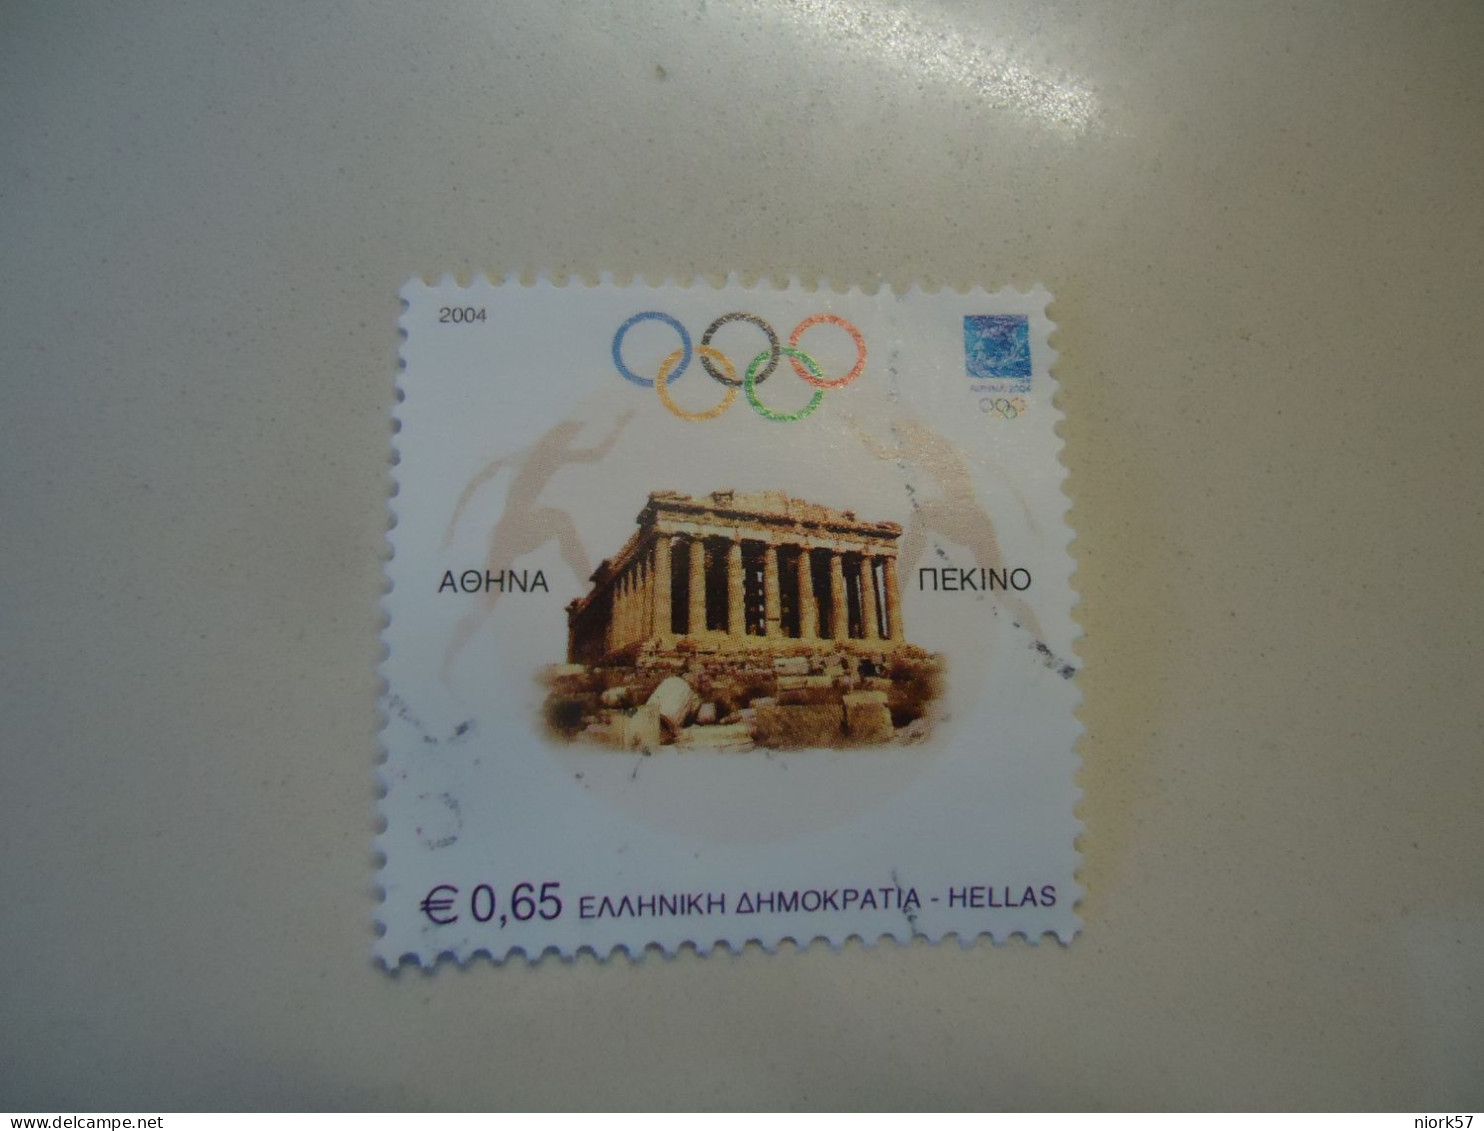 GREECE   USED  STAMPS 2004 OLYMPIC GAMES ATHENS 2004 - Sommer 2004: Athen - Paralympics